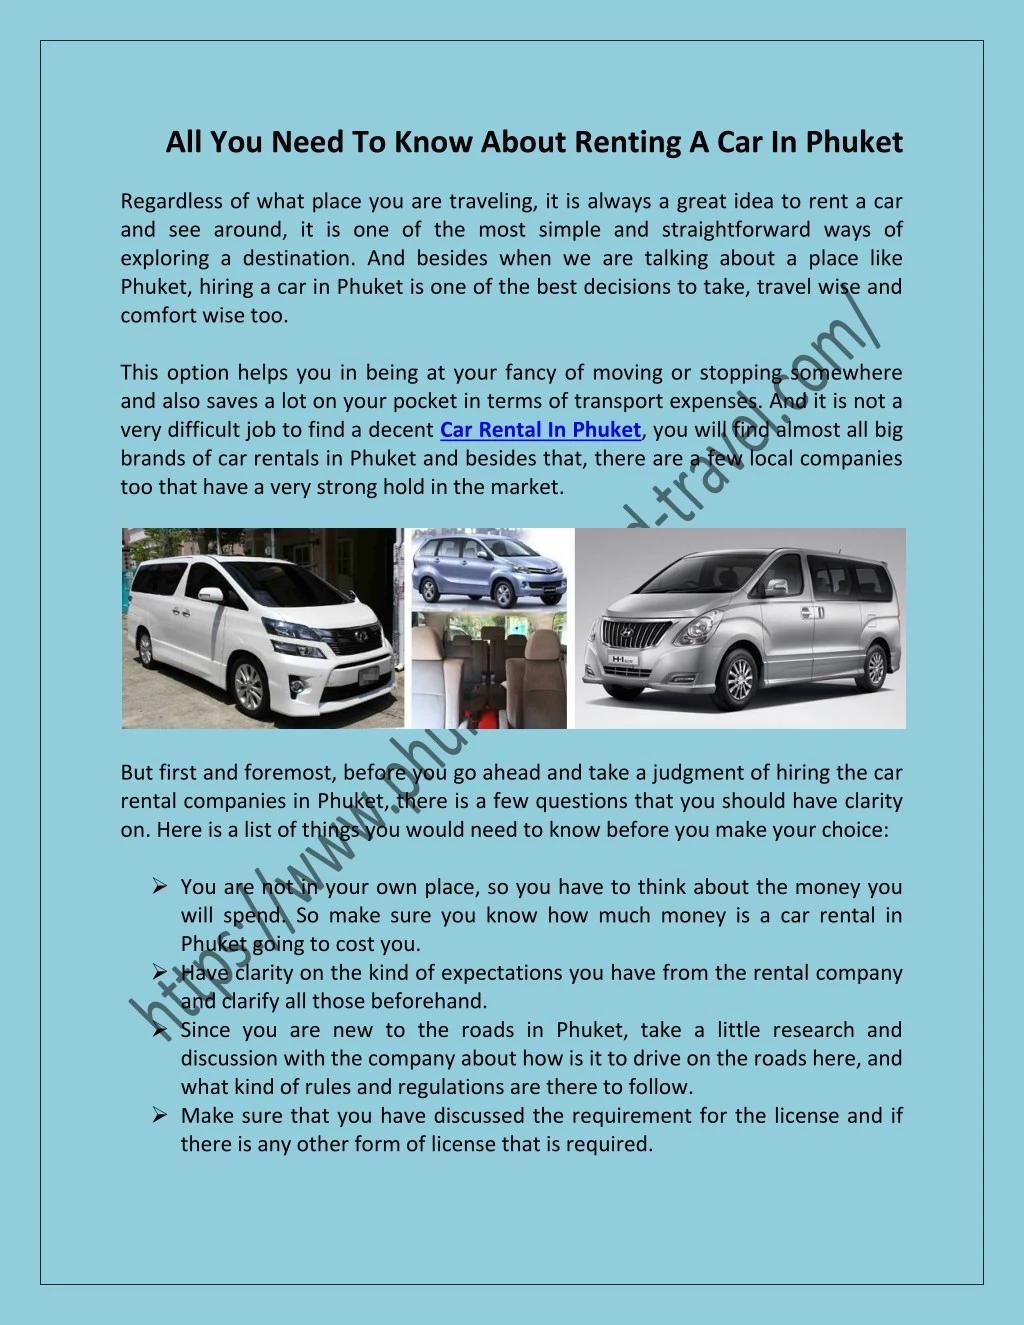 all you need to know about renting a car in phuket